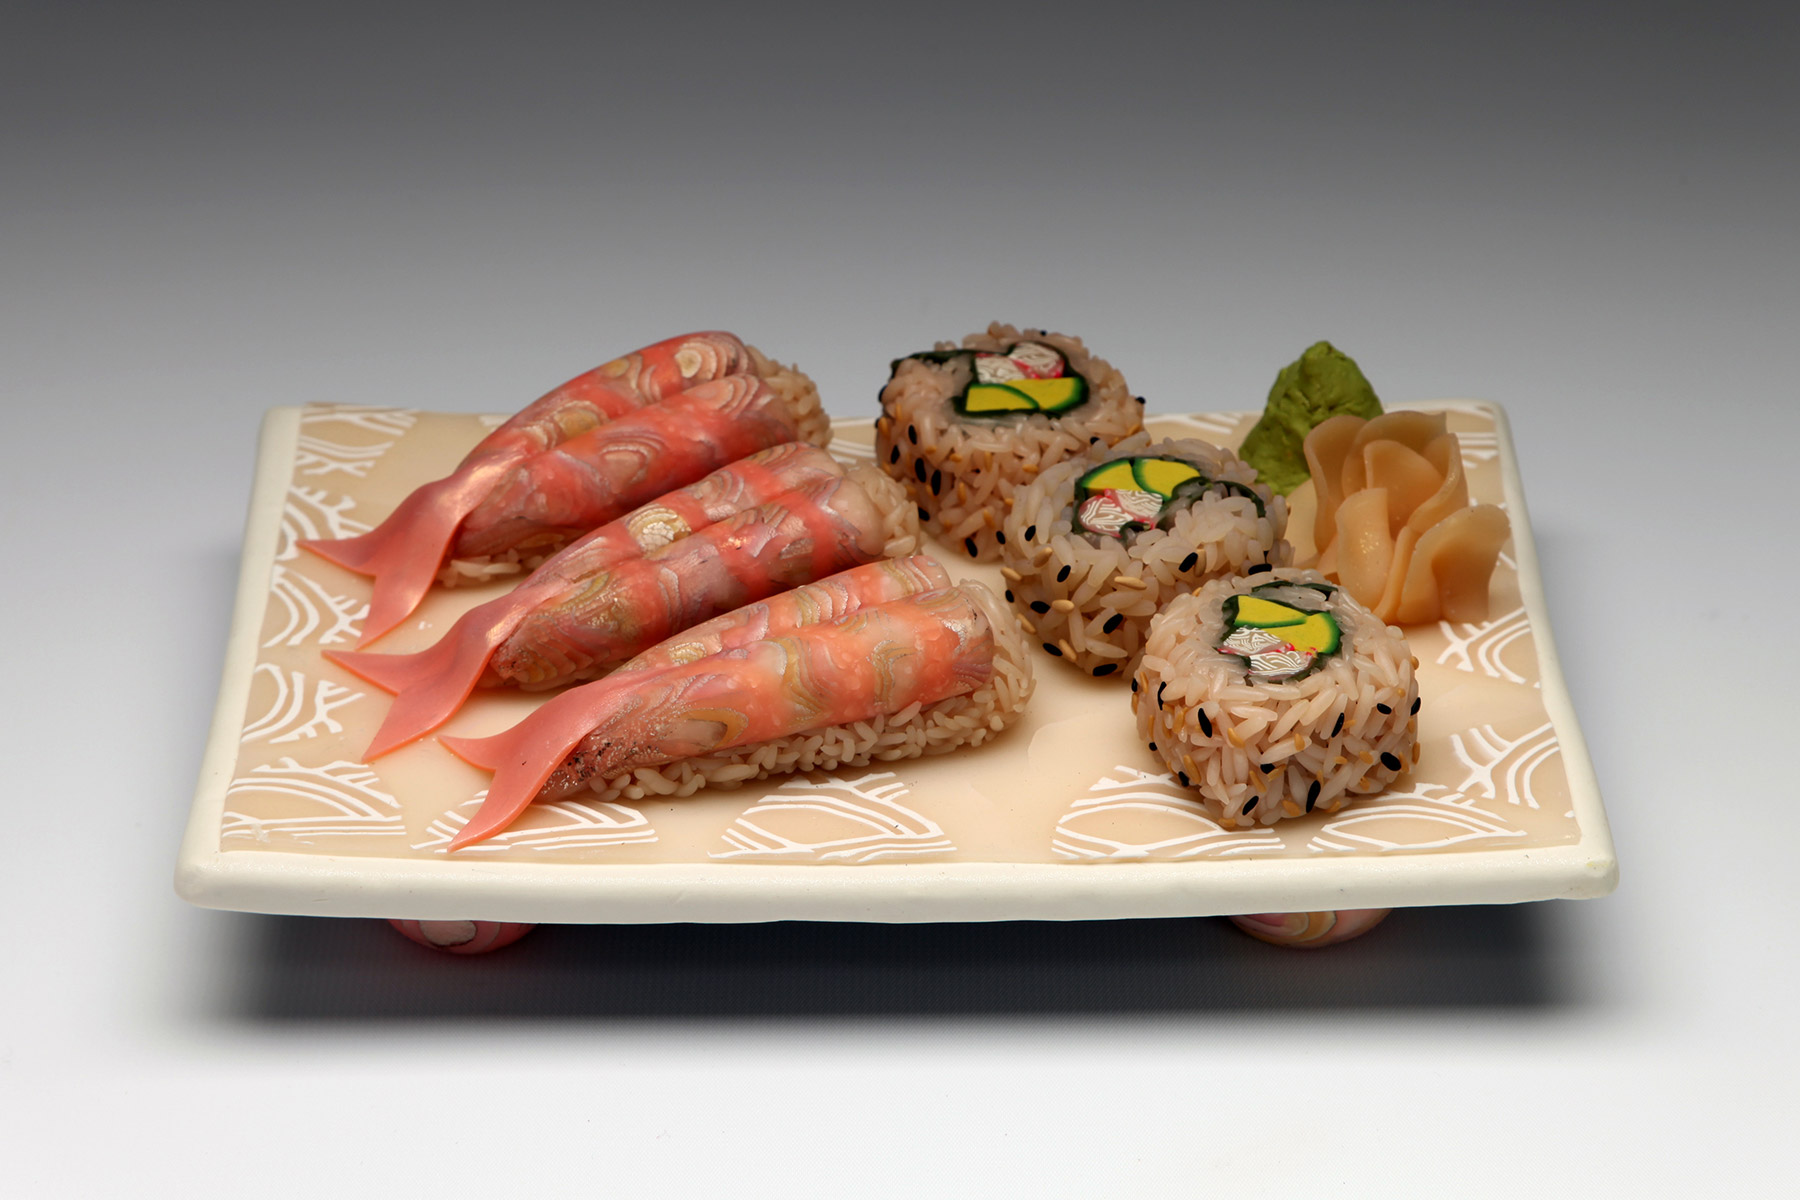 Polymer clay formed into the shape of a light tan/pink decorated platter. Atop the platter are three pieces of faux sashimi on the left with brown rice and pink fish; three pieces of faux sushi in the center with brown rice and green and pink filling; and faux ginger on the right with faux wasabi behind it.